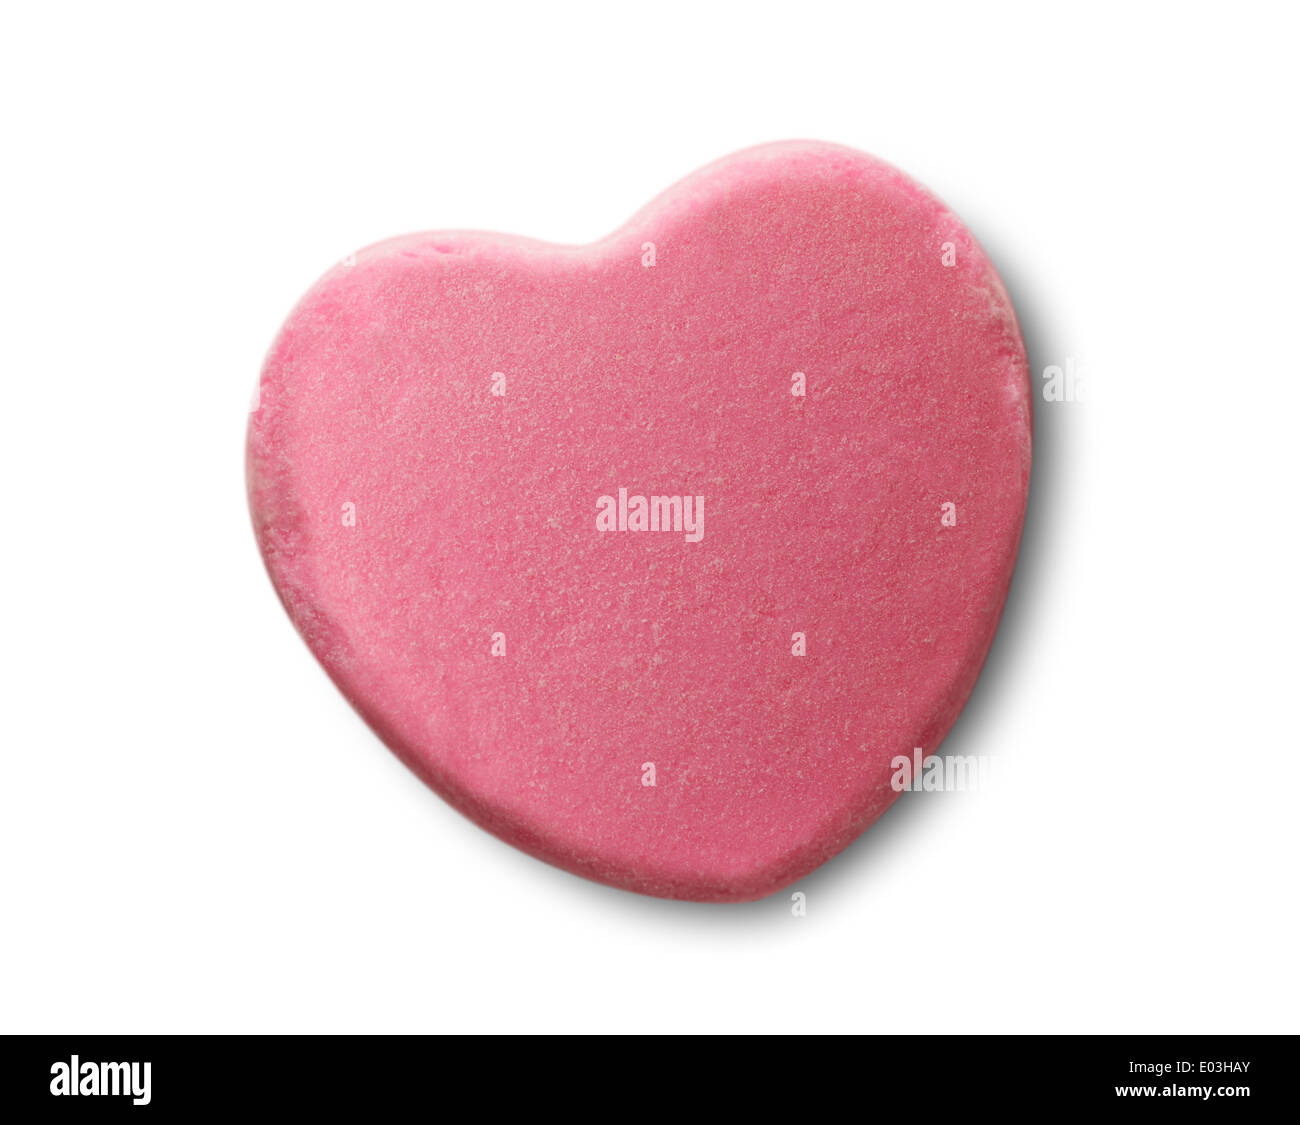 Pink Candy Valentines Heart, Isolated on White Background. Stockfoto